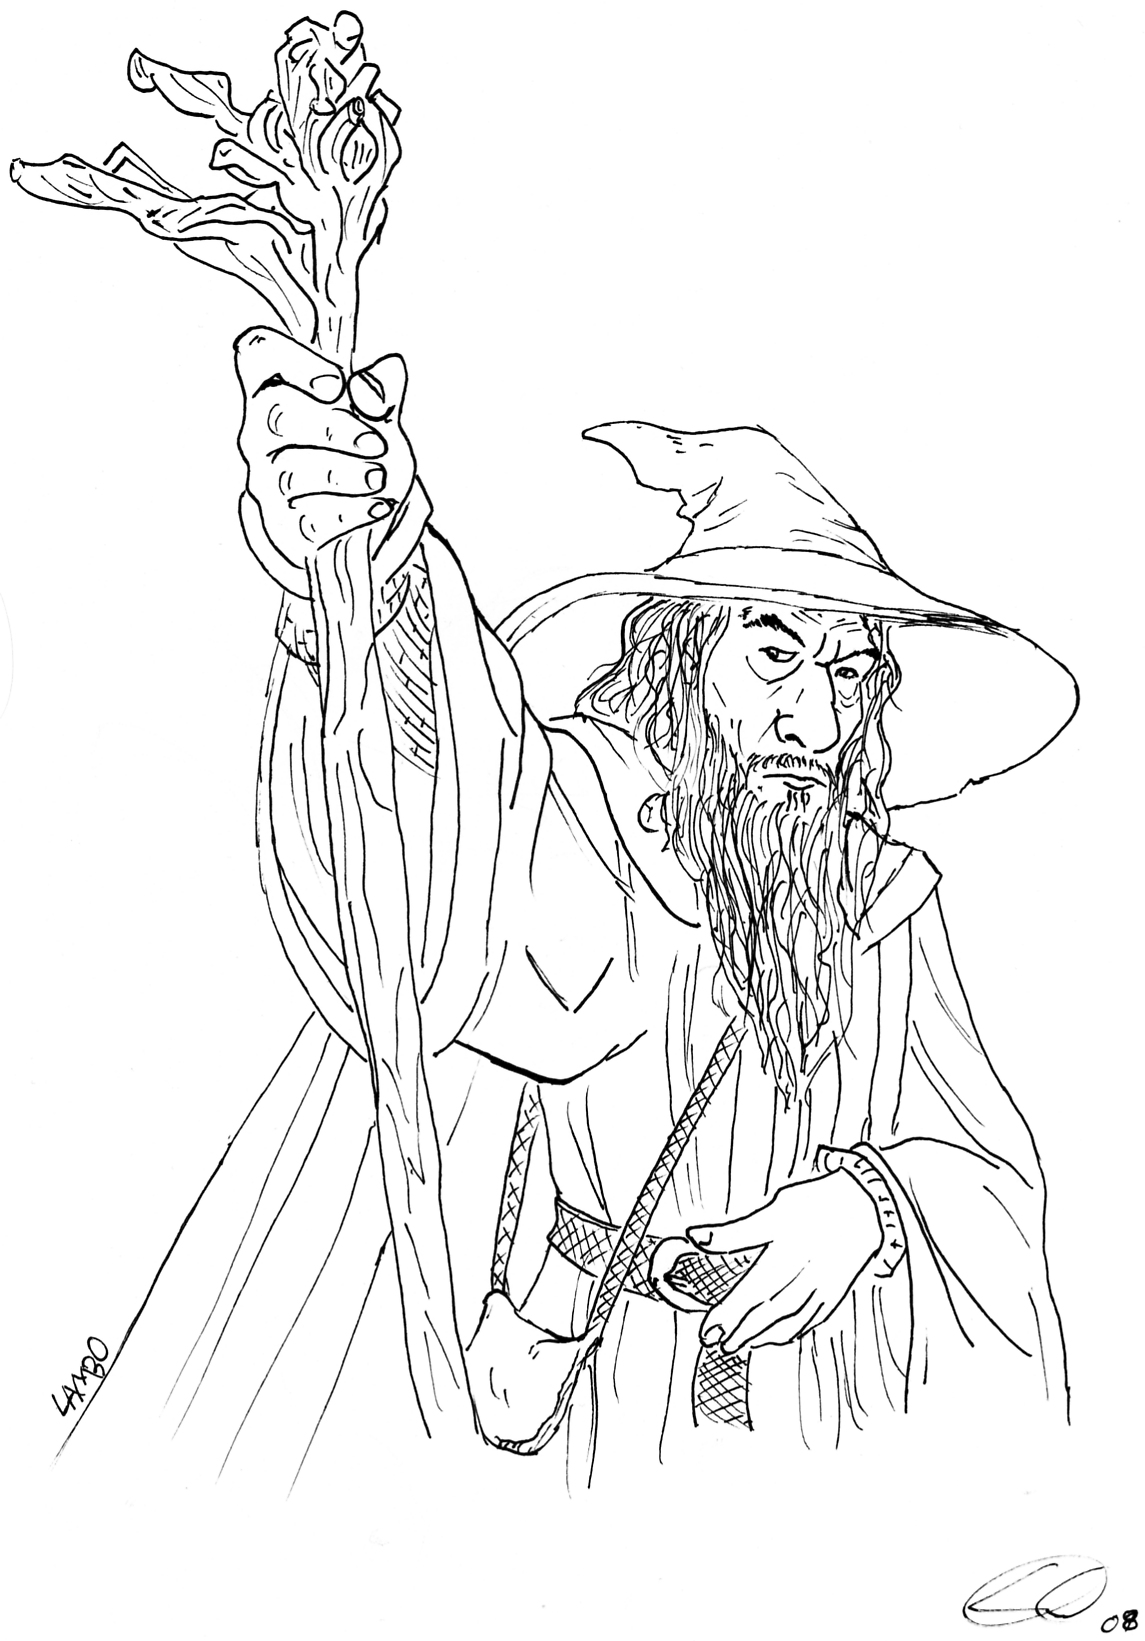 gandalf the gray coloring pages - photo #27